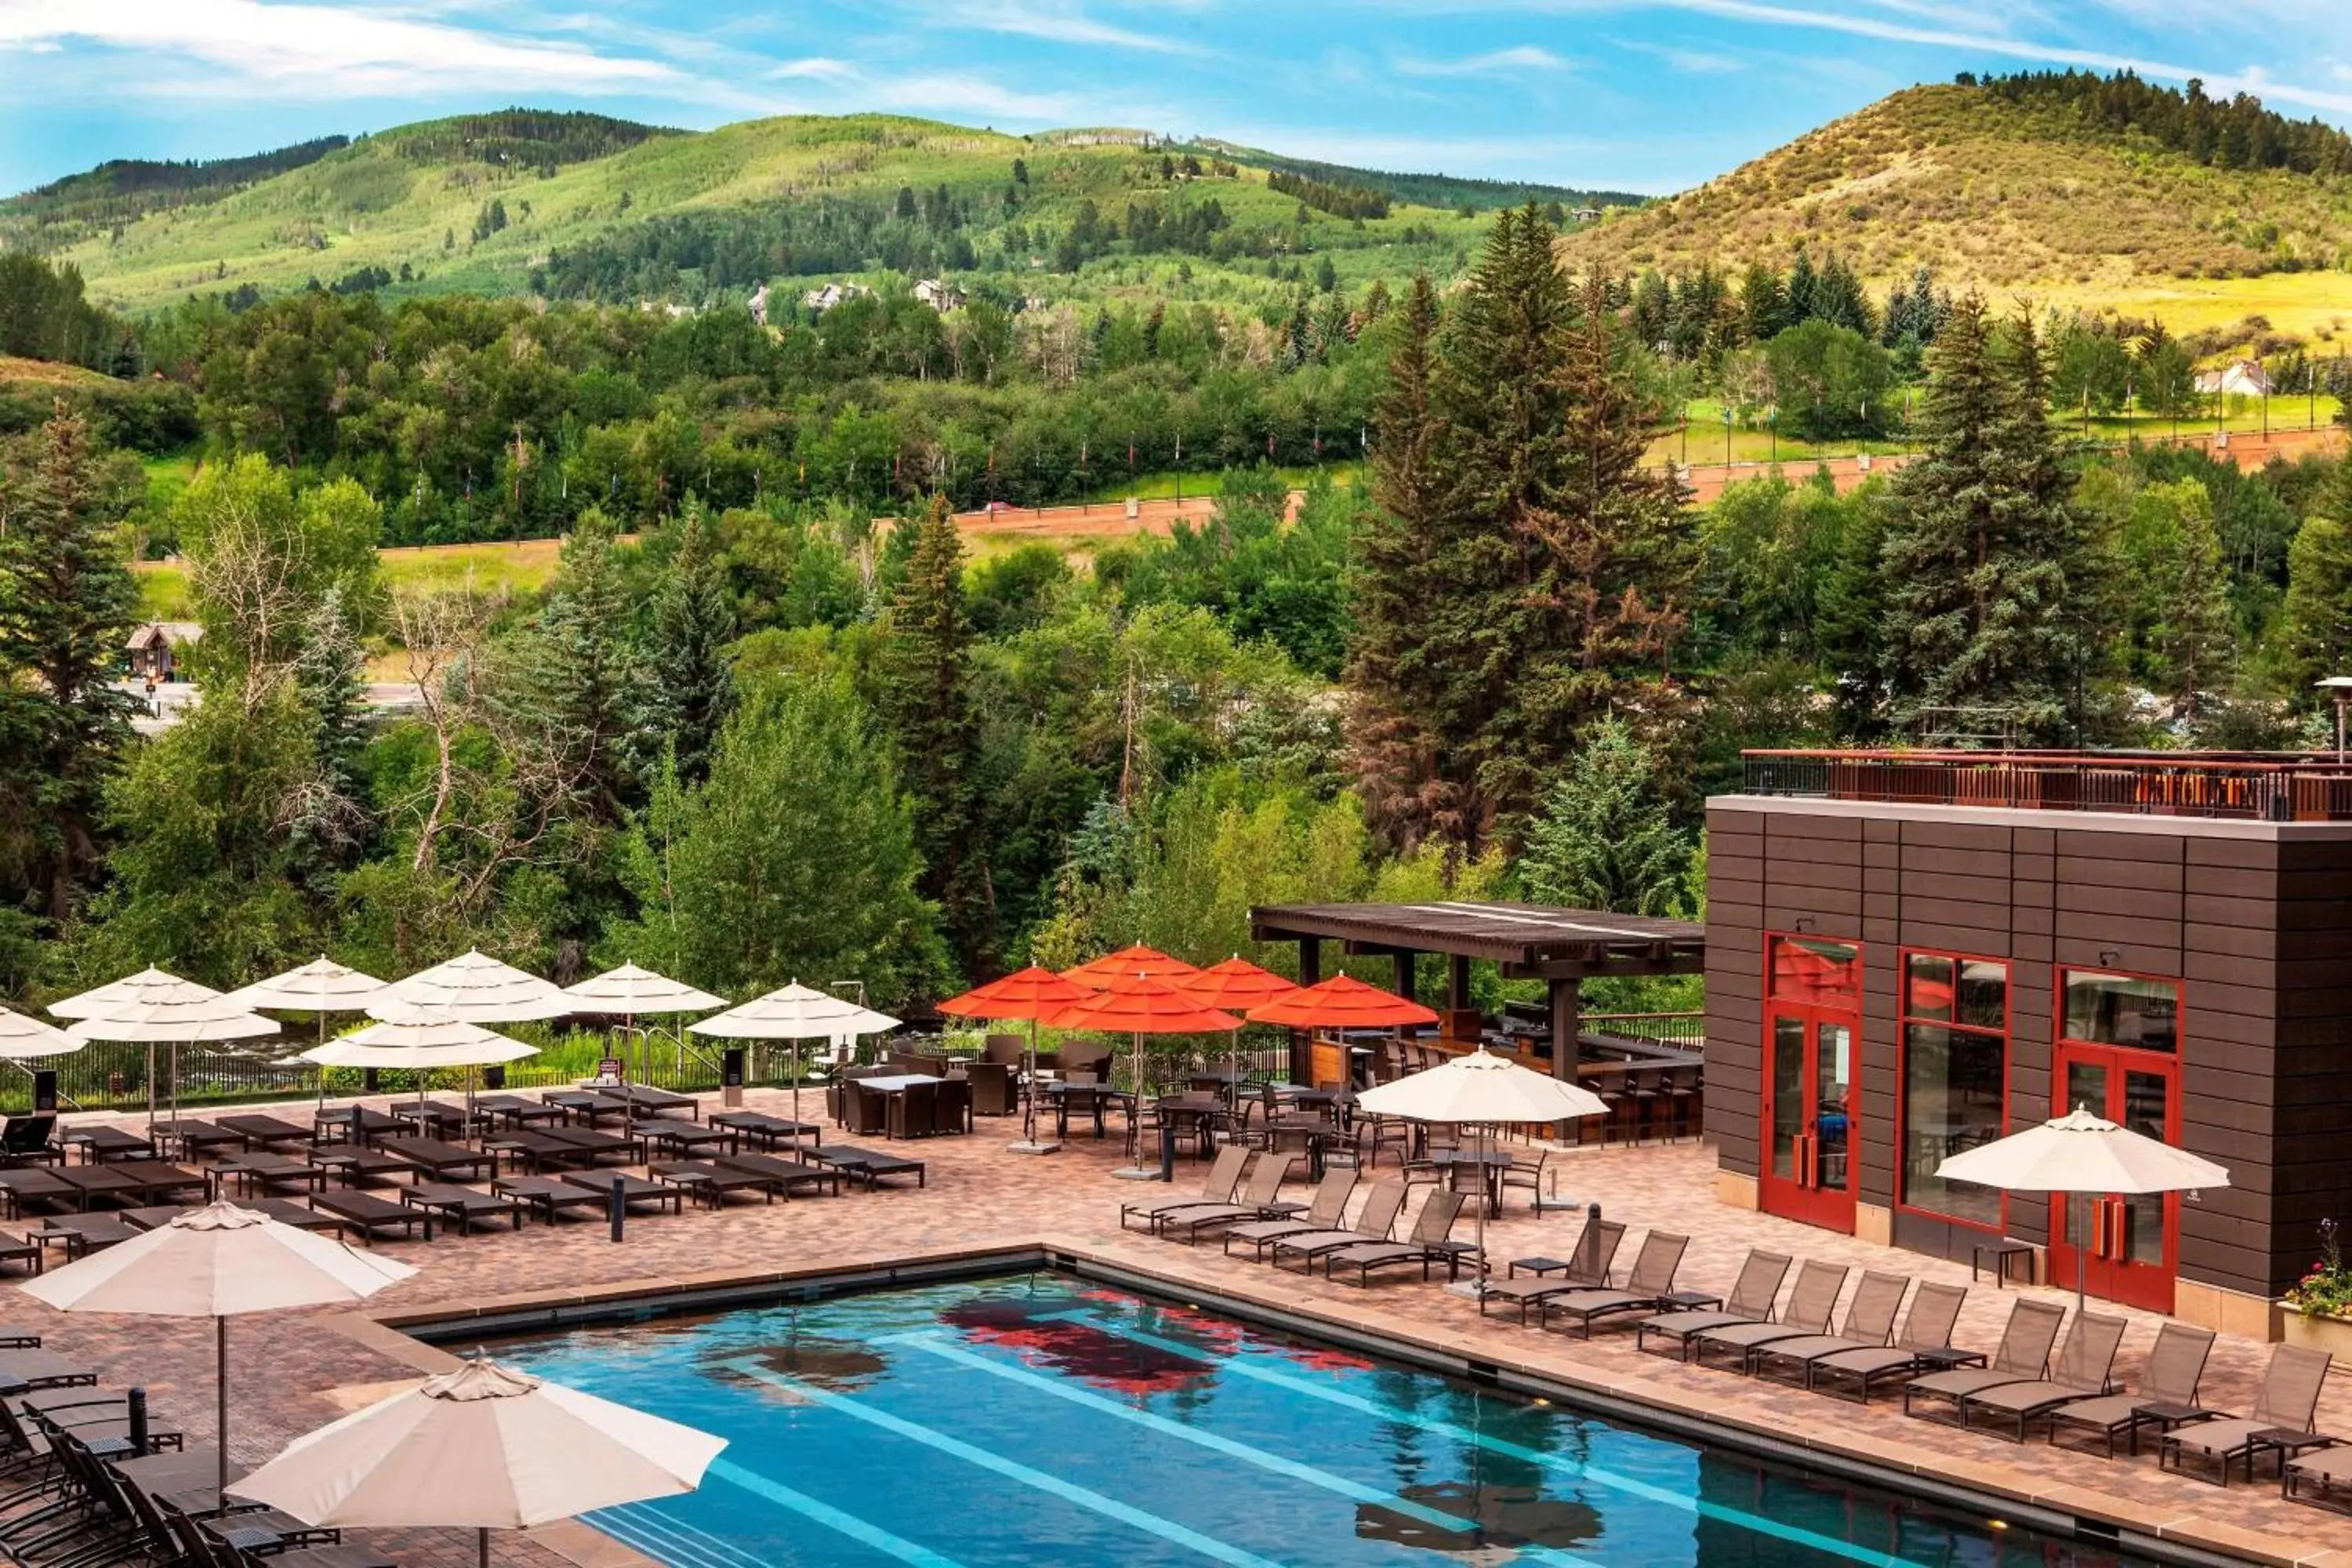 Swimming pool, Pool View in The Westin Riverfront Resort & Spa, Avon, Vail Valley